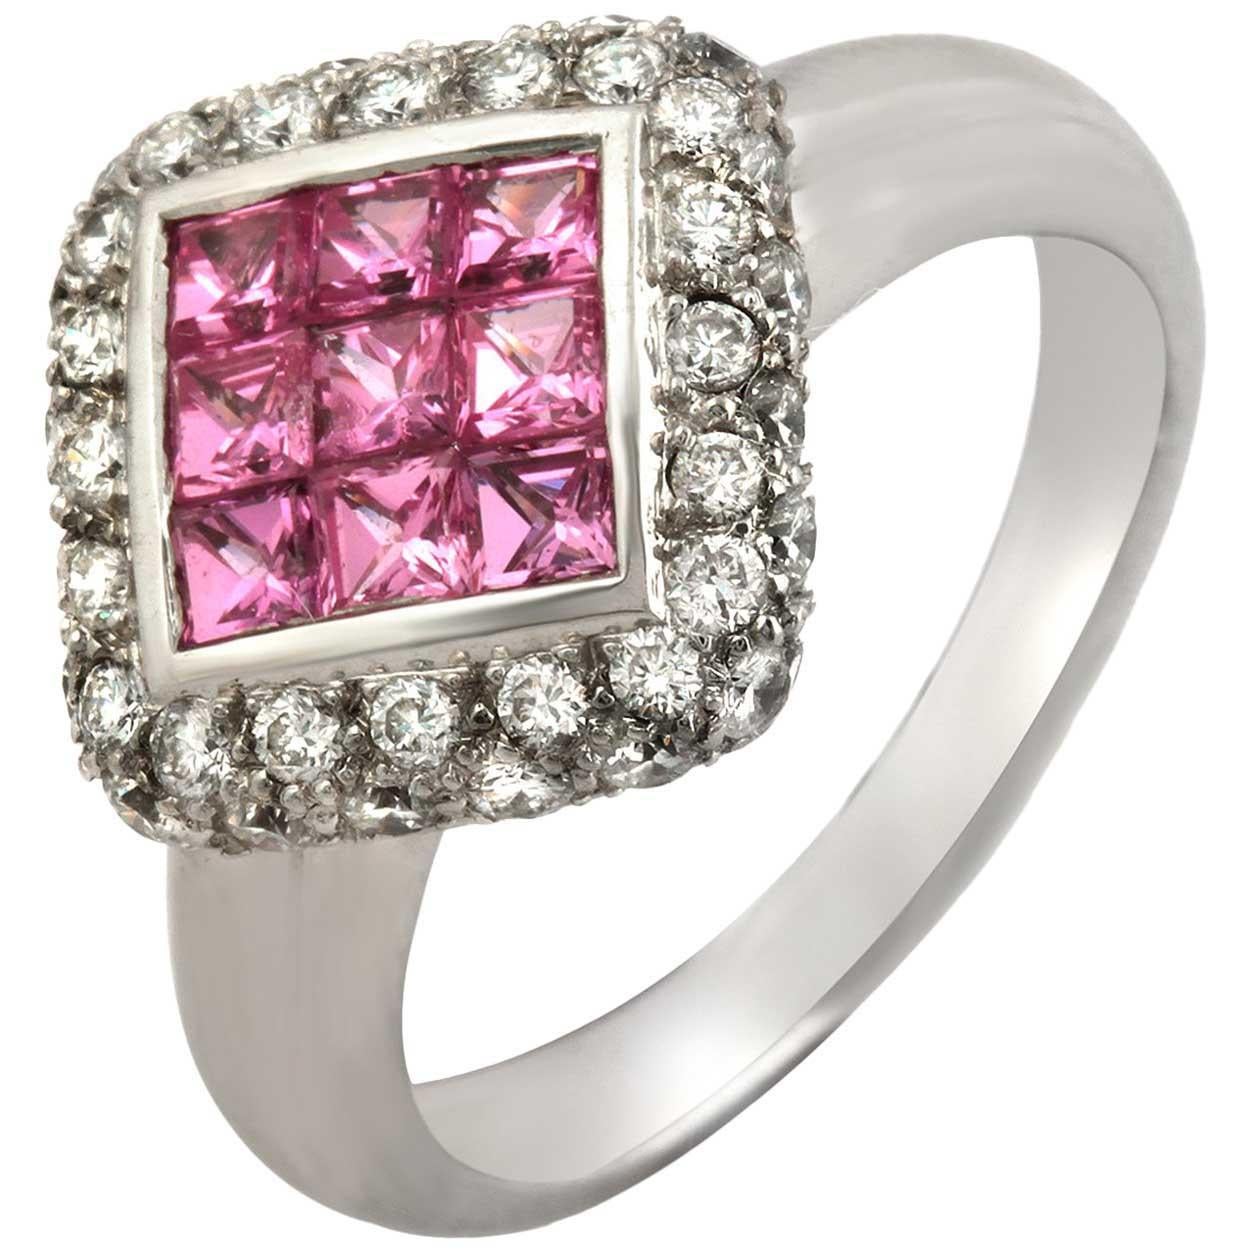 1.27 Carat Pink Sapphire and 0.24 Carat Diamonds in 18 Karat White Gold Ring For Sale